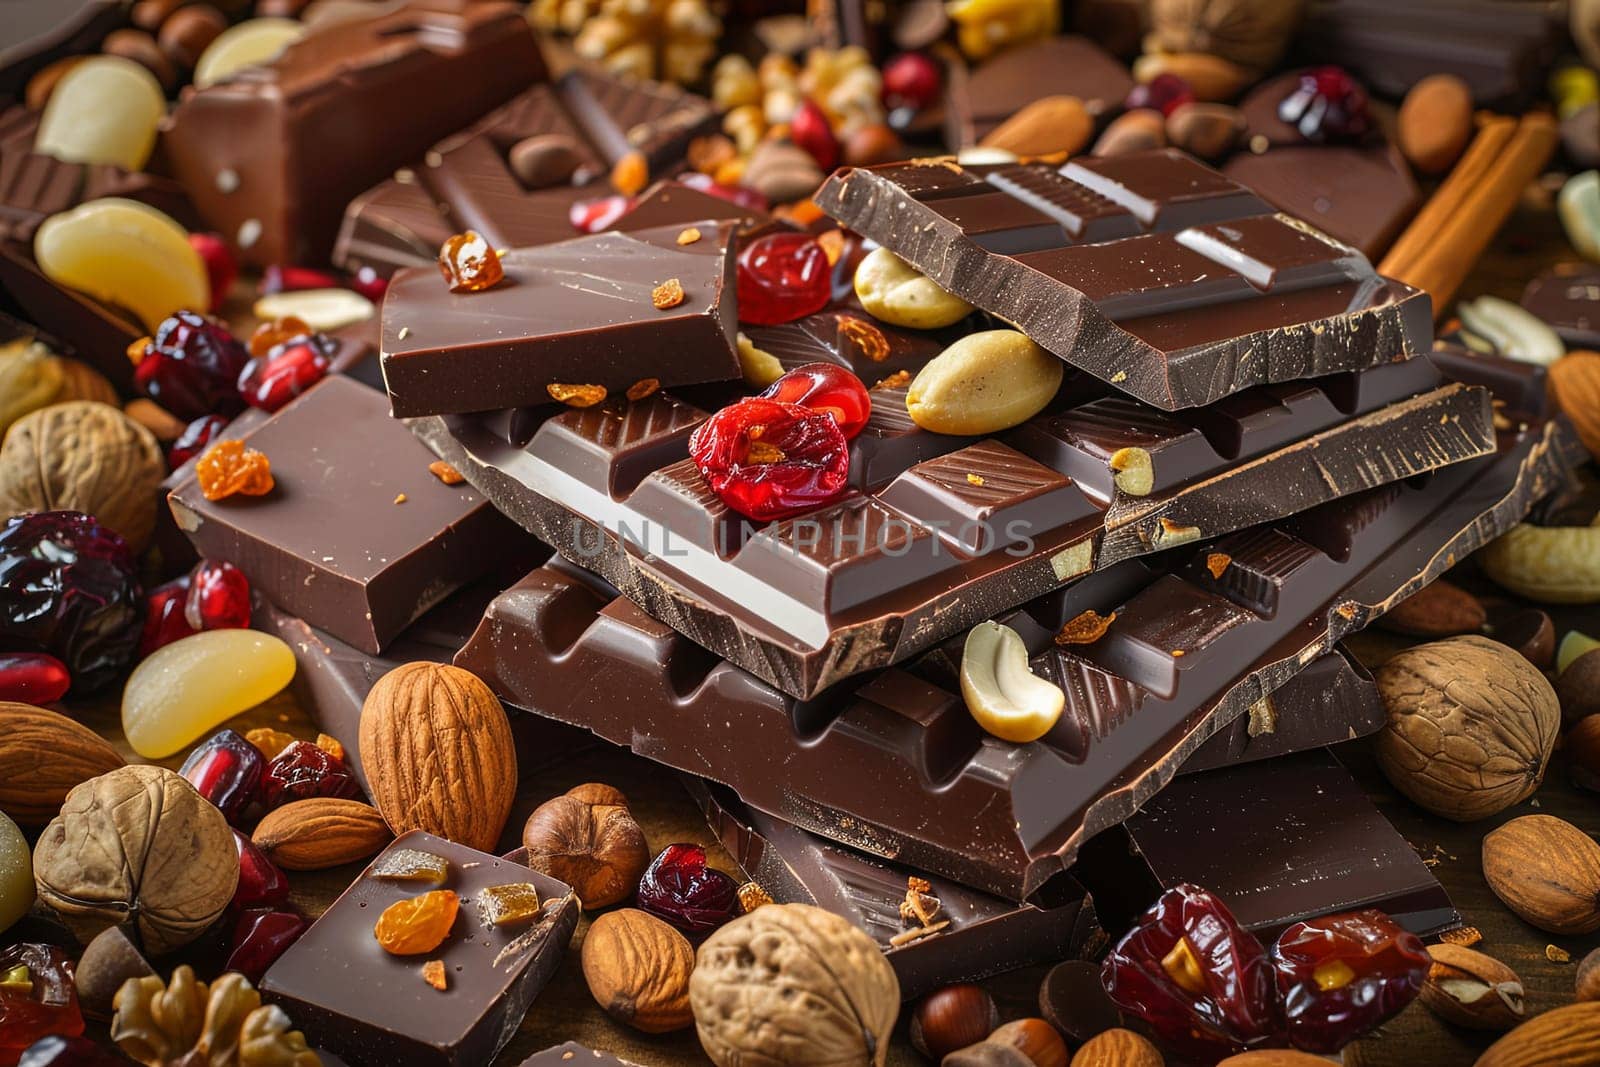 A mound of chocolate bars adorned with nuts and cranberries, showcasing rich textures and natural ingredients.